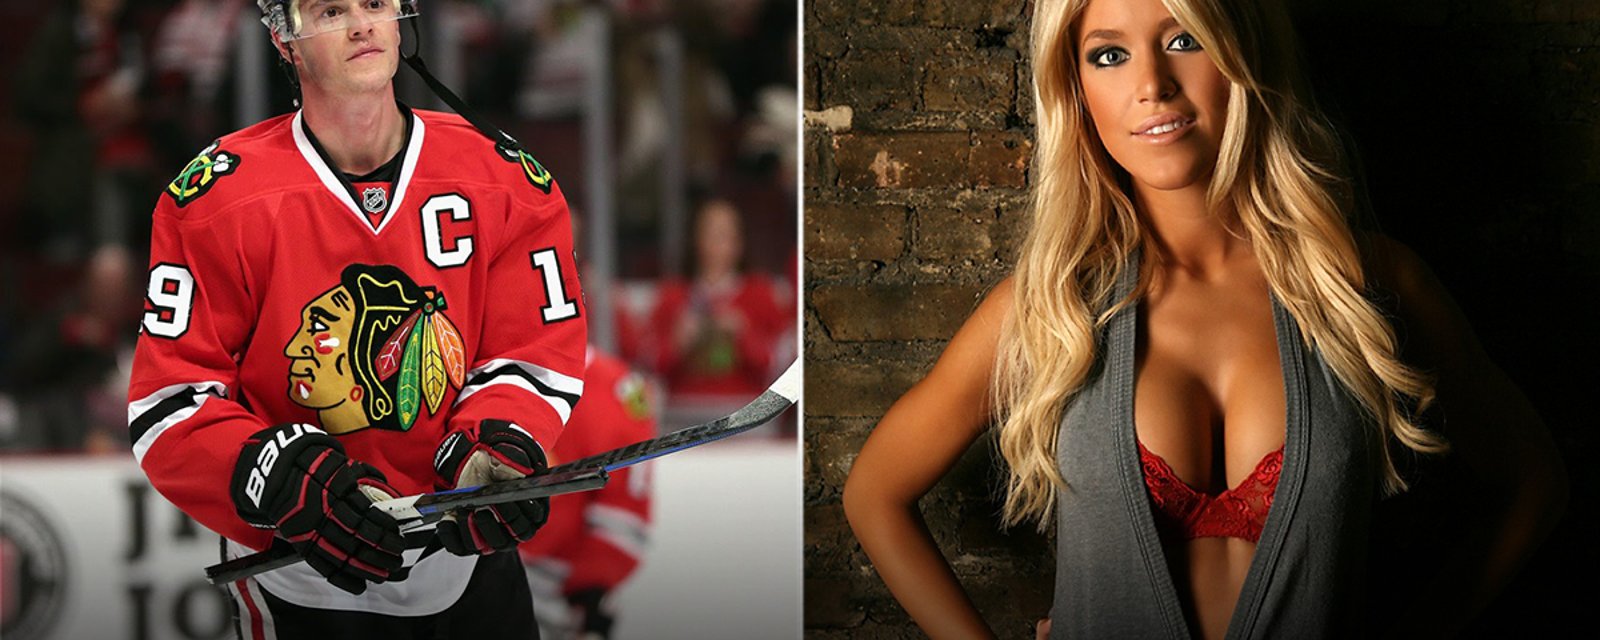 Must See: Toews’ girlfriend Vecchione heats up the golf course